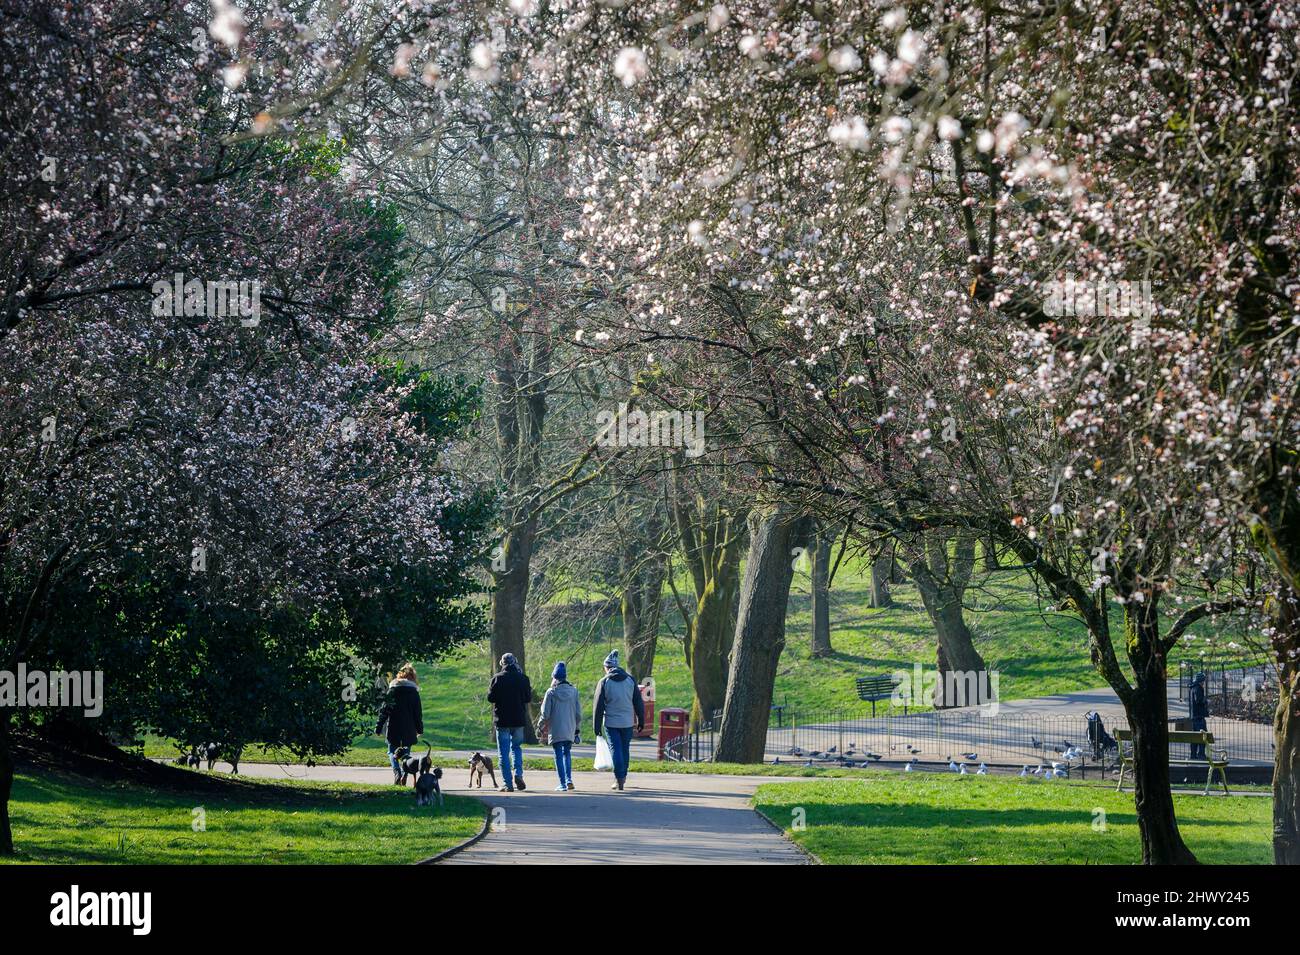 Bolton, Lancashire, UK, Tuesday March 09, 2022. Dog walkers take a stroll through an avenue of Cherry Blossom trees on a beautiful spring like morning in Queen's Park, Bolton. Credit: Paul Heyes/Alamy News Live Stock Photo